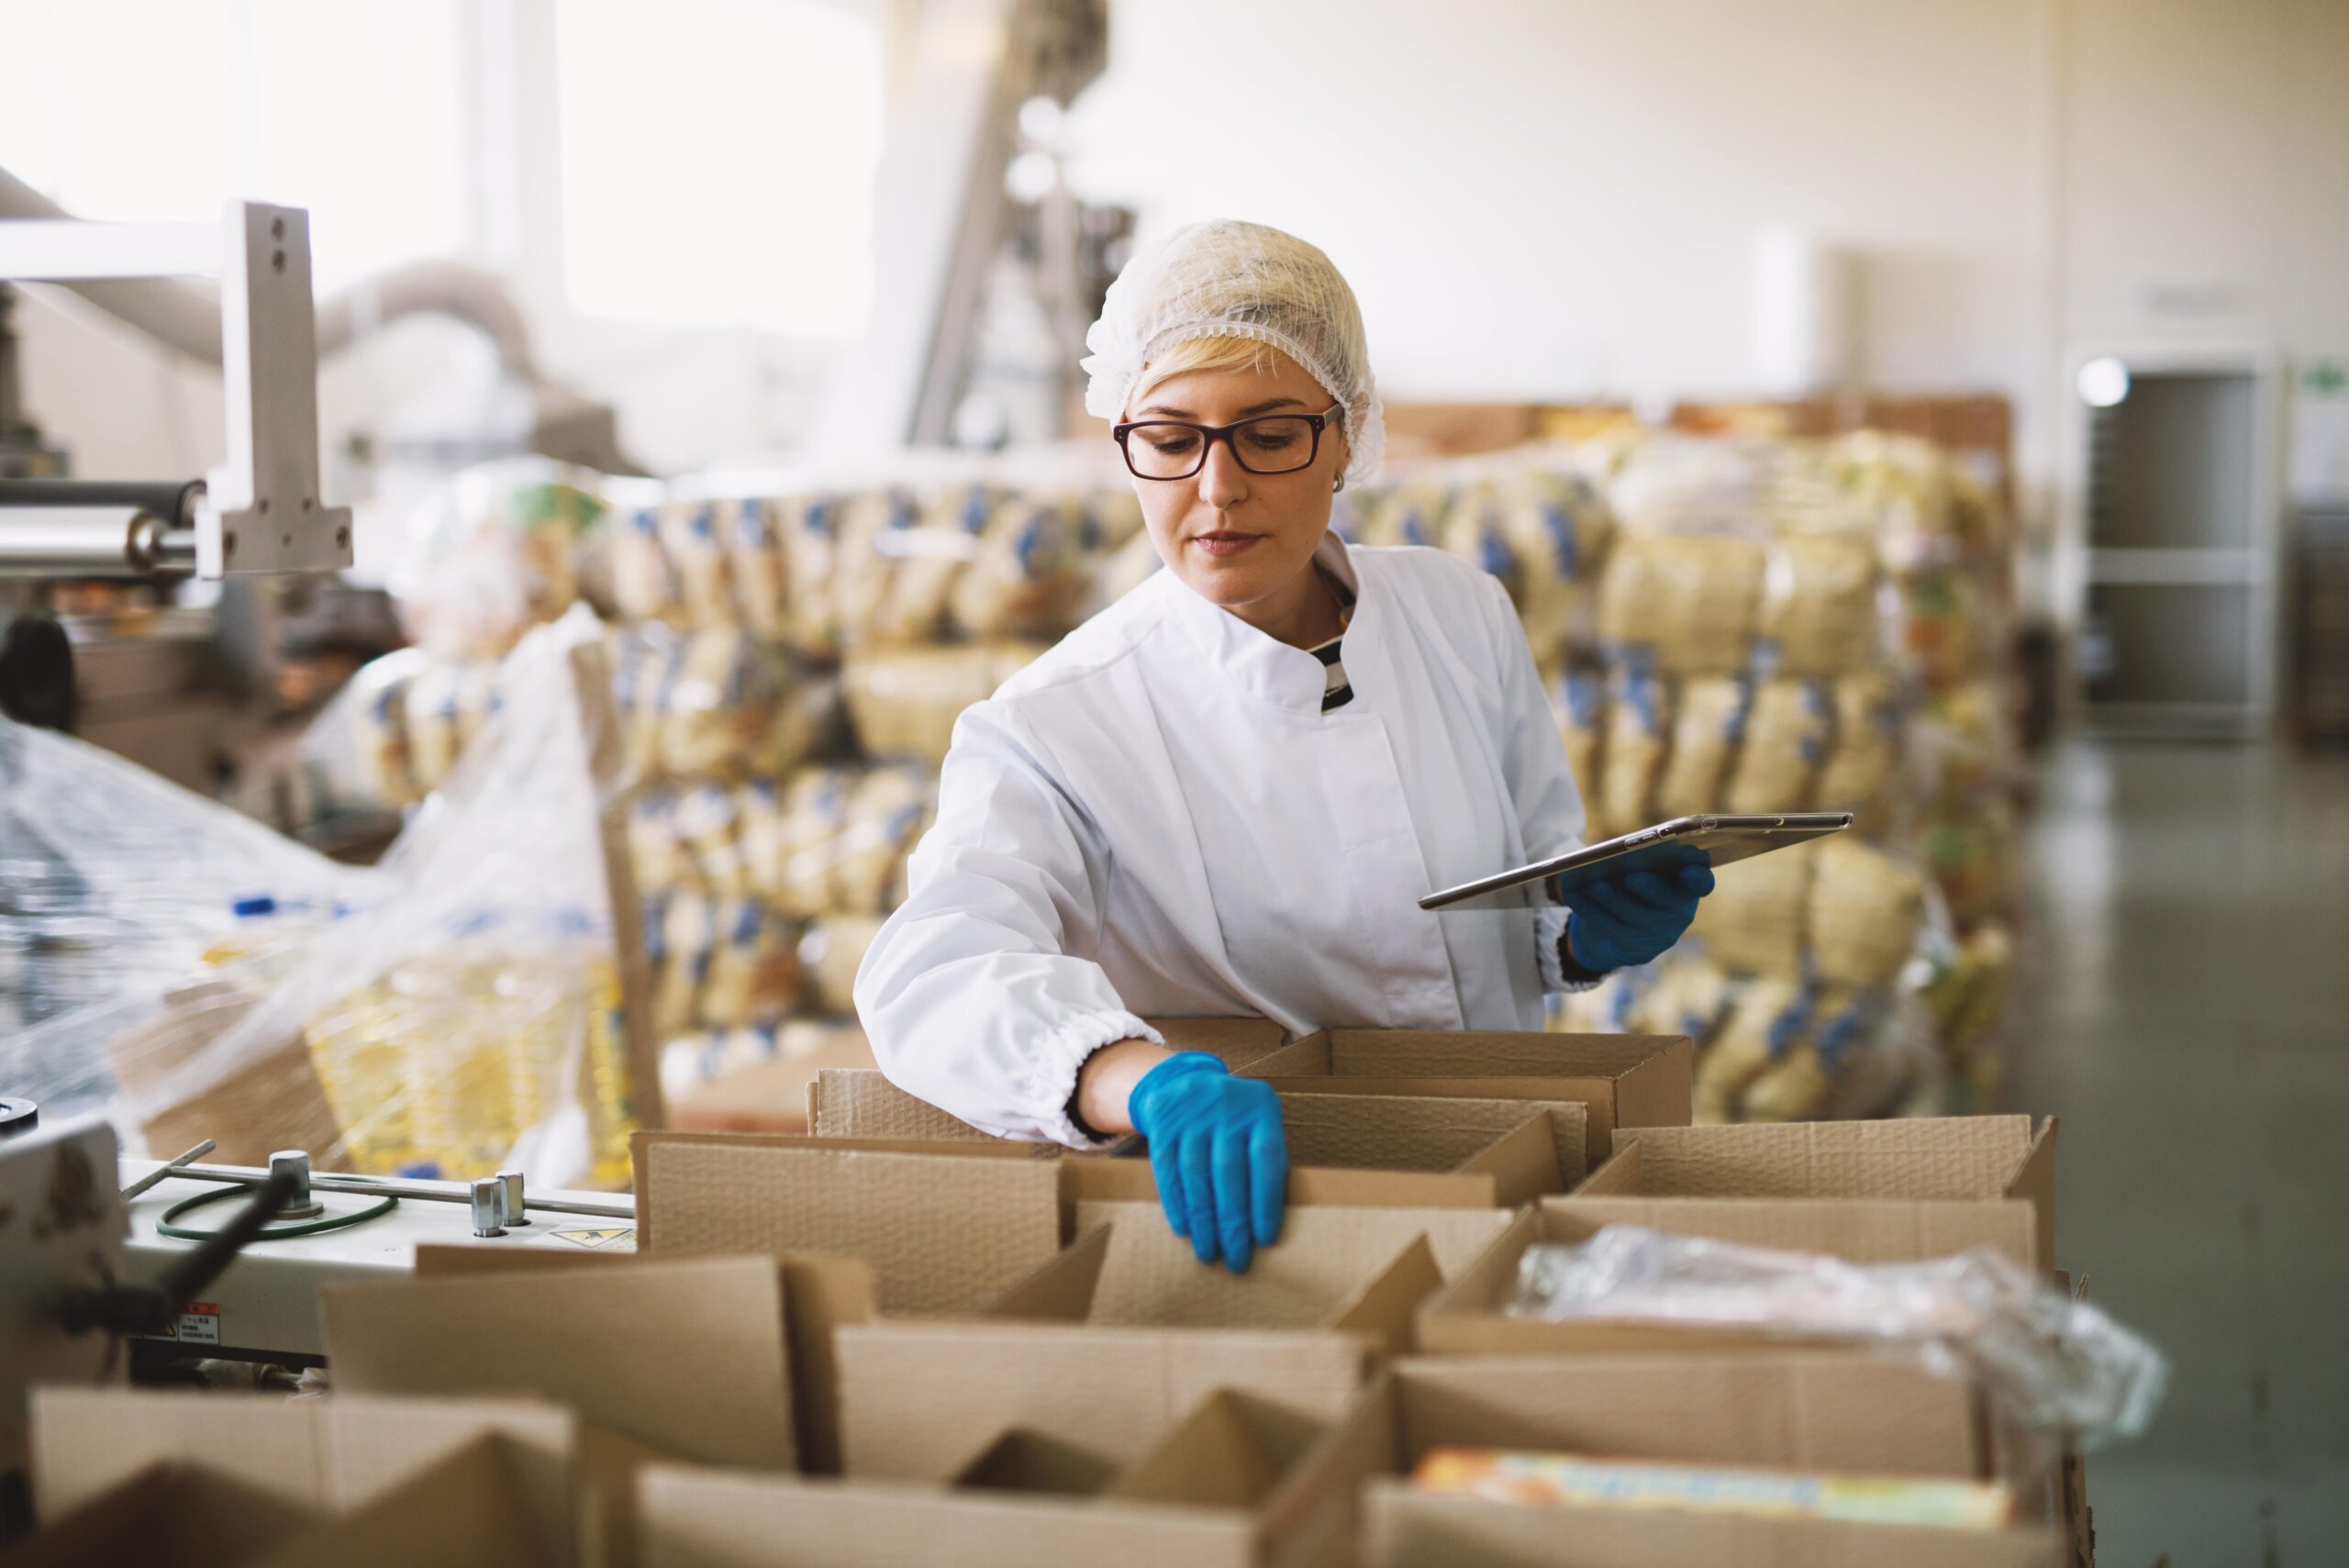 Lady holding tablet wearing blue gloves and lab coat checking boxes in a warehouse